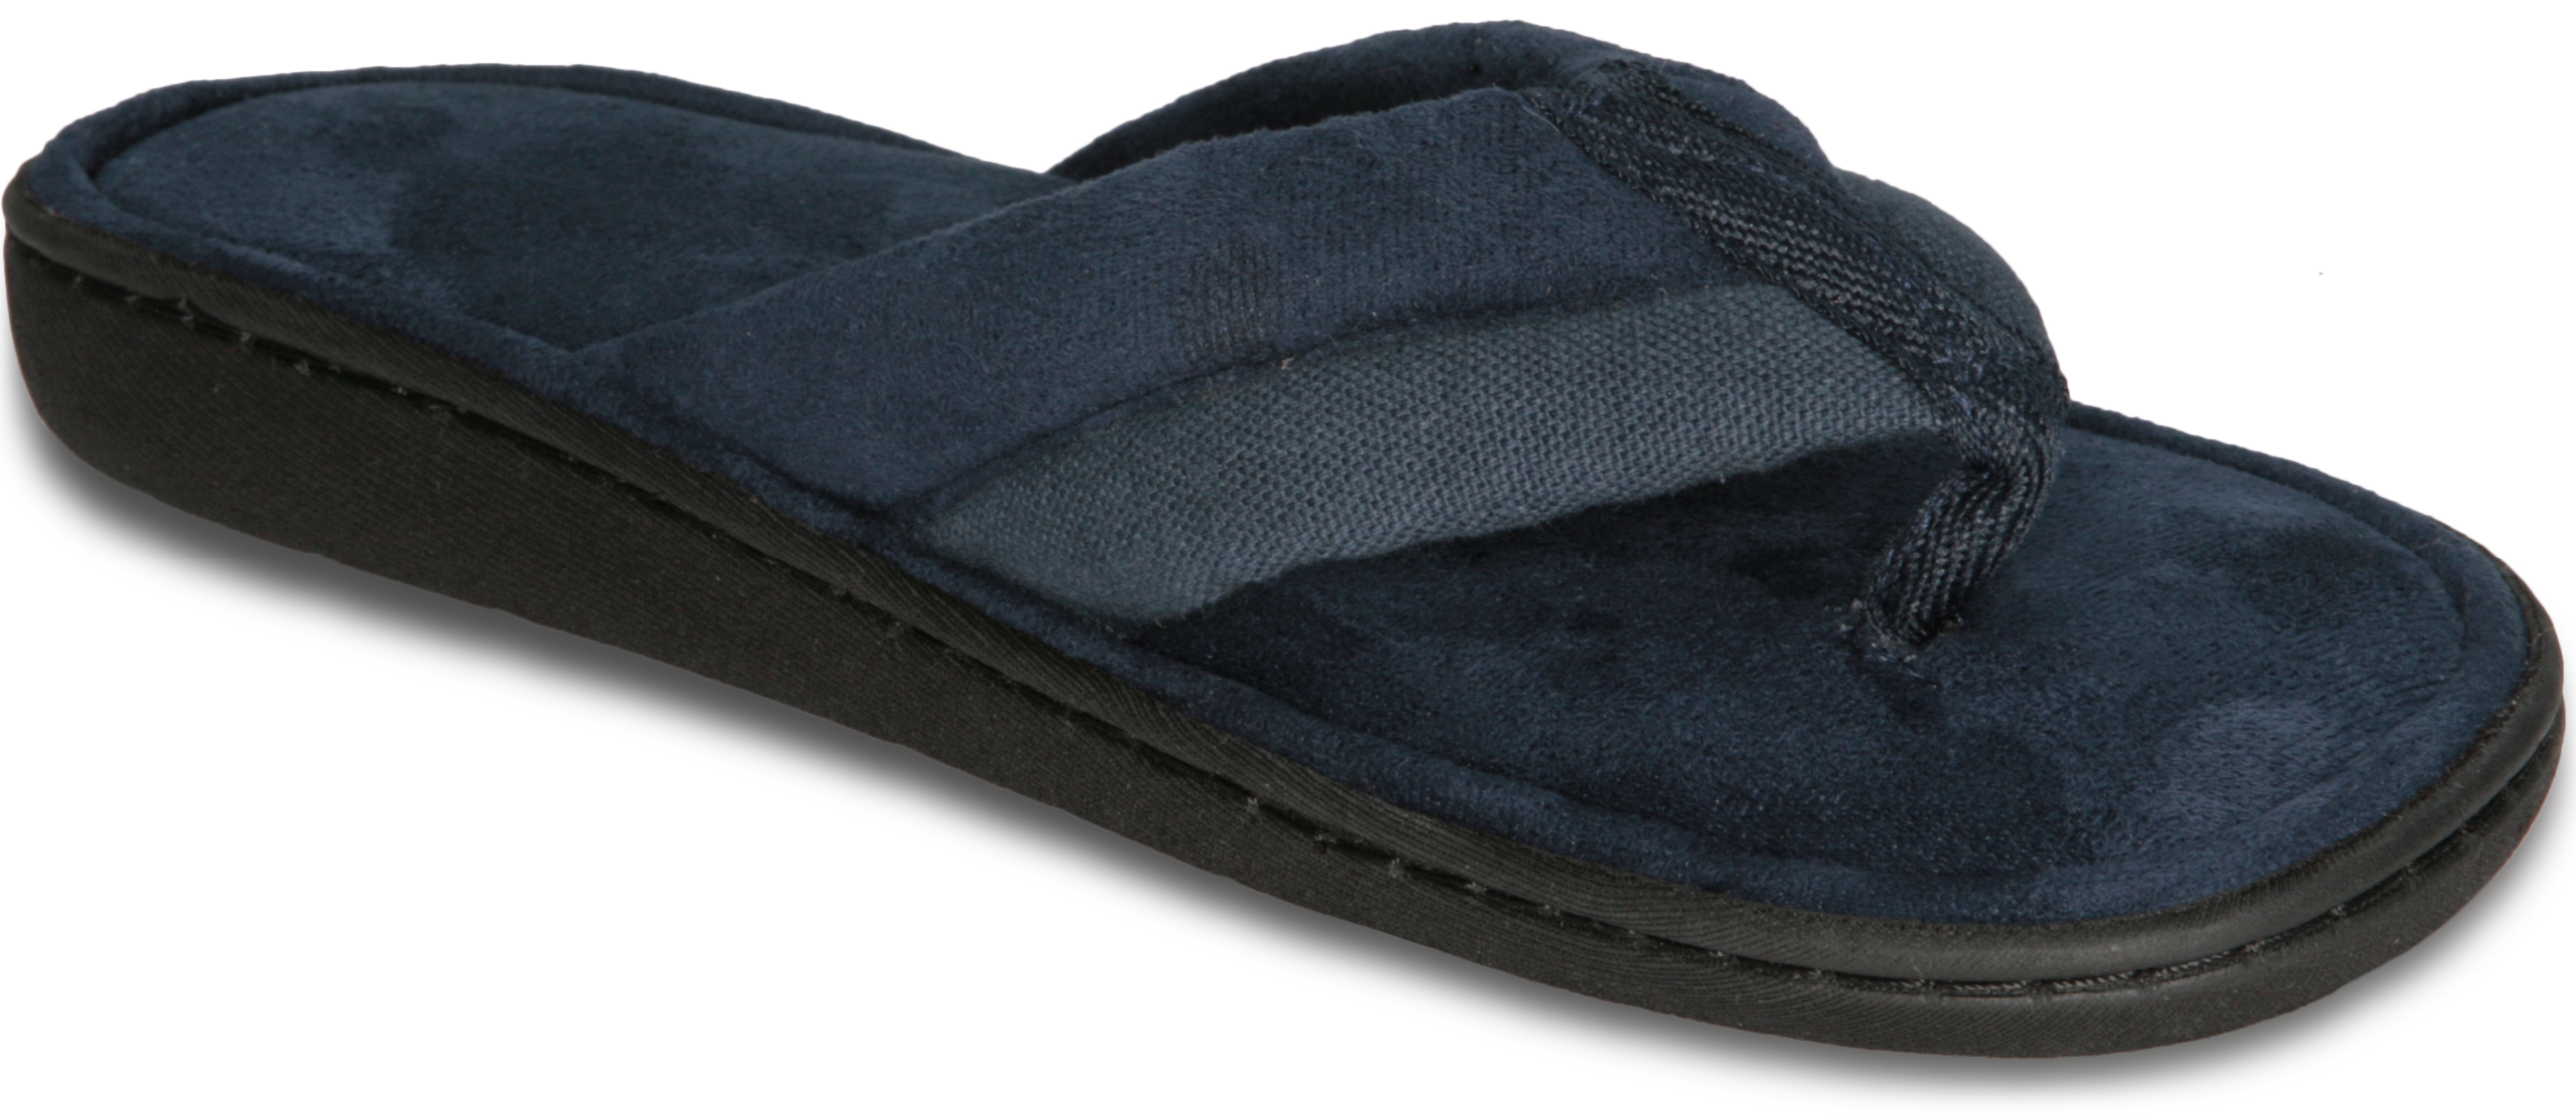 Deluxe Comfort Mens Memory Foam Slipper, Size 11-12 - Soft Linen 120D SBR Insole & Rubber Outsole - Pure Suede Shoes - Non Marking Sole - Mens Slippers, Blue - image 1 of 4